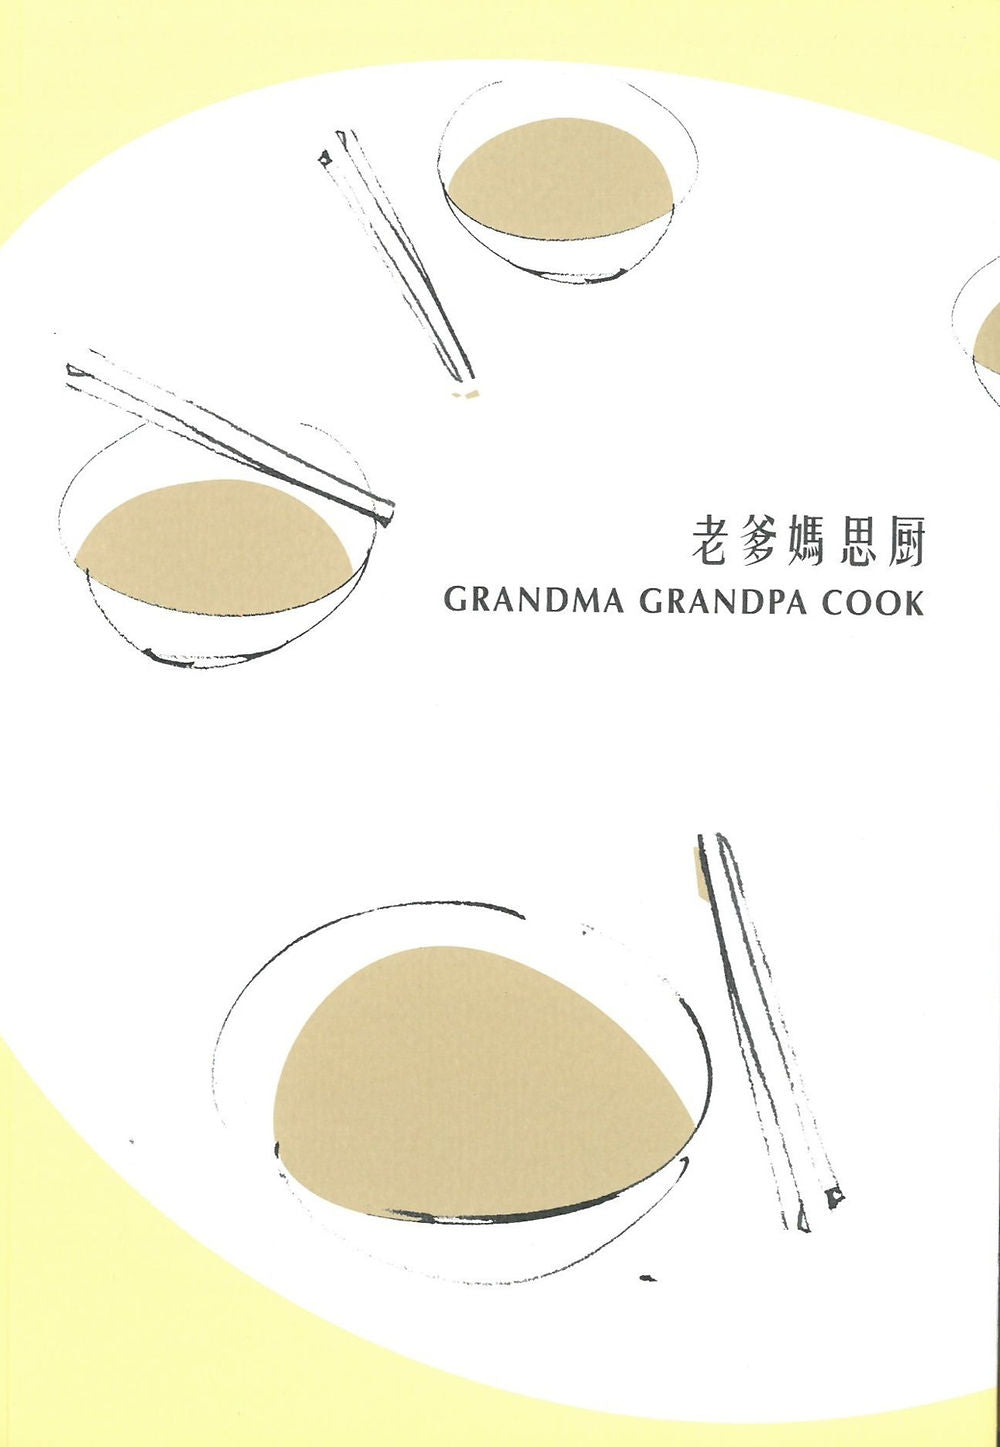 Grandma Grandpa Cook (Softback) Concept by Evelyna Liang, Photography by Michael Wolf, Edited by Yueng Yang (Reprint Edition)